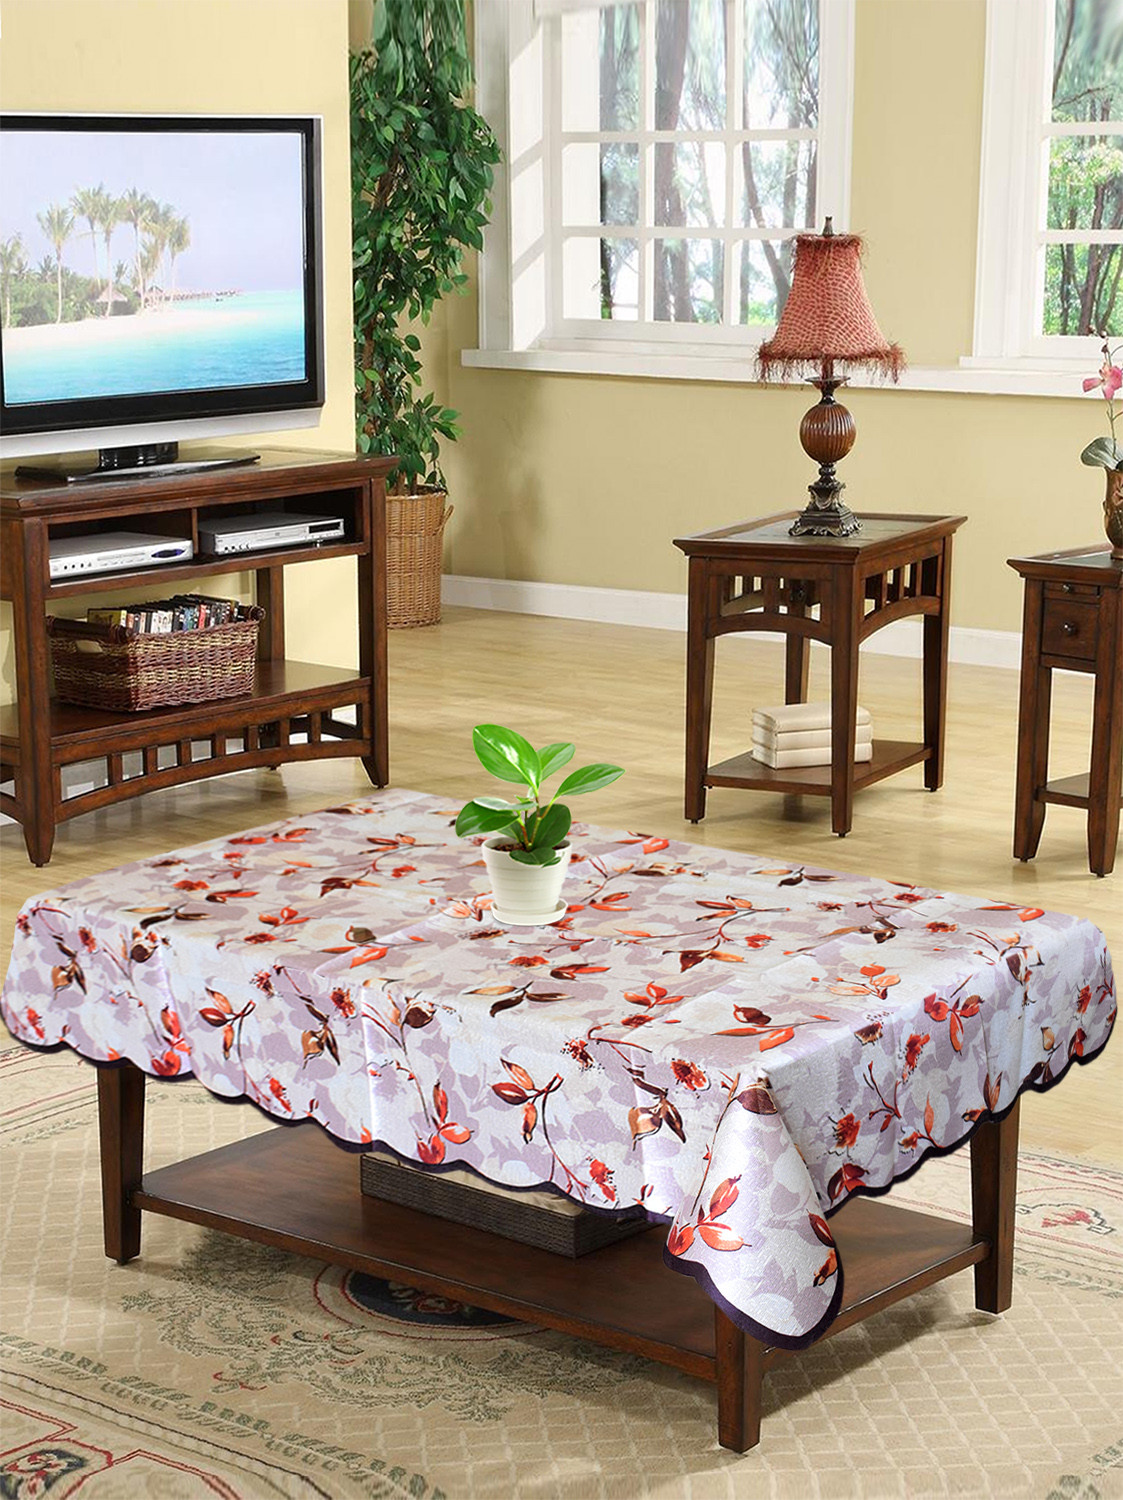 Kuber Industries Flower Printed Soft Cotton 4 Seater Center Table Cover- 40